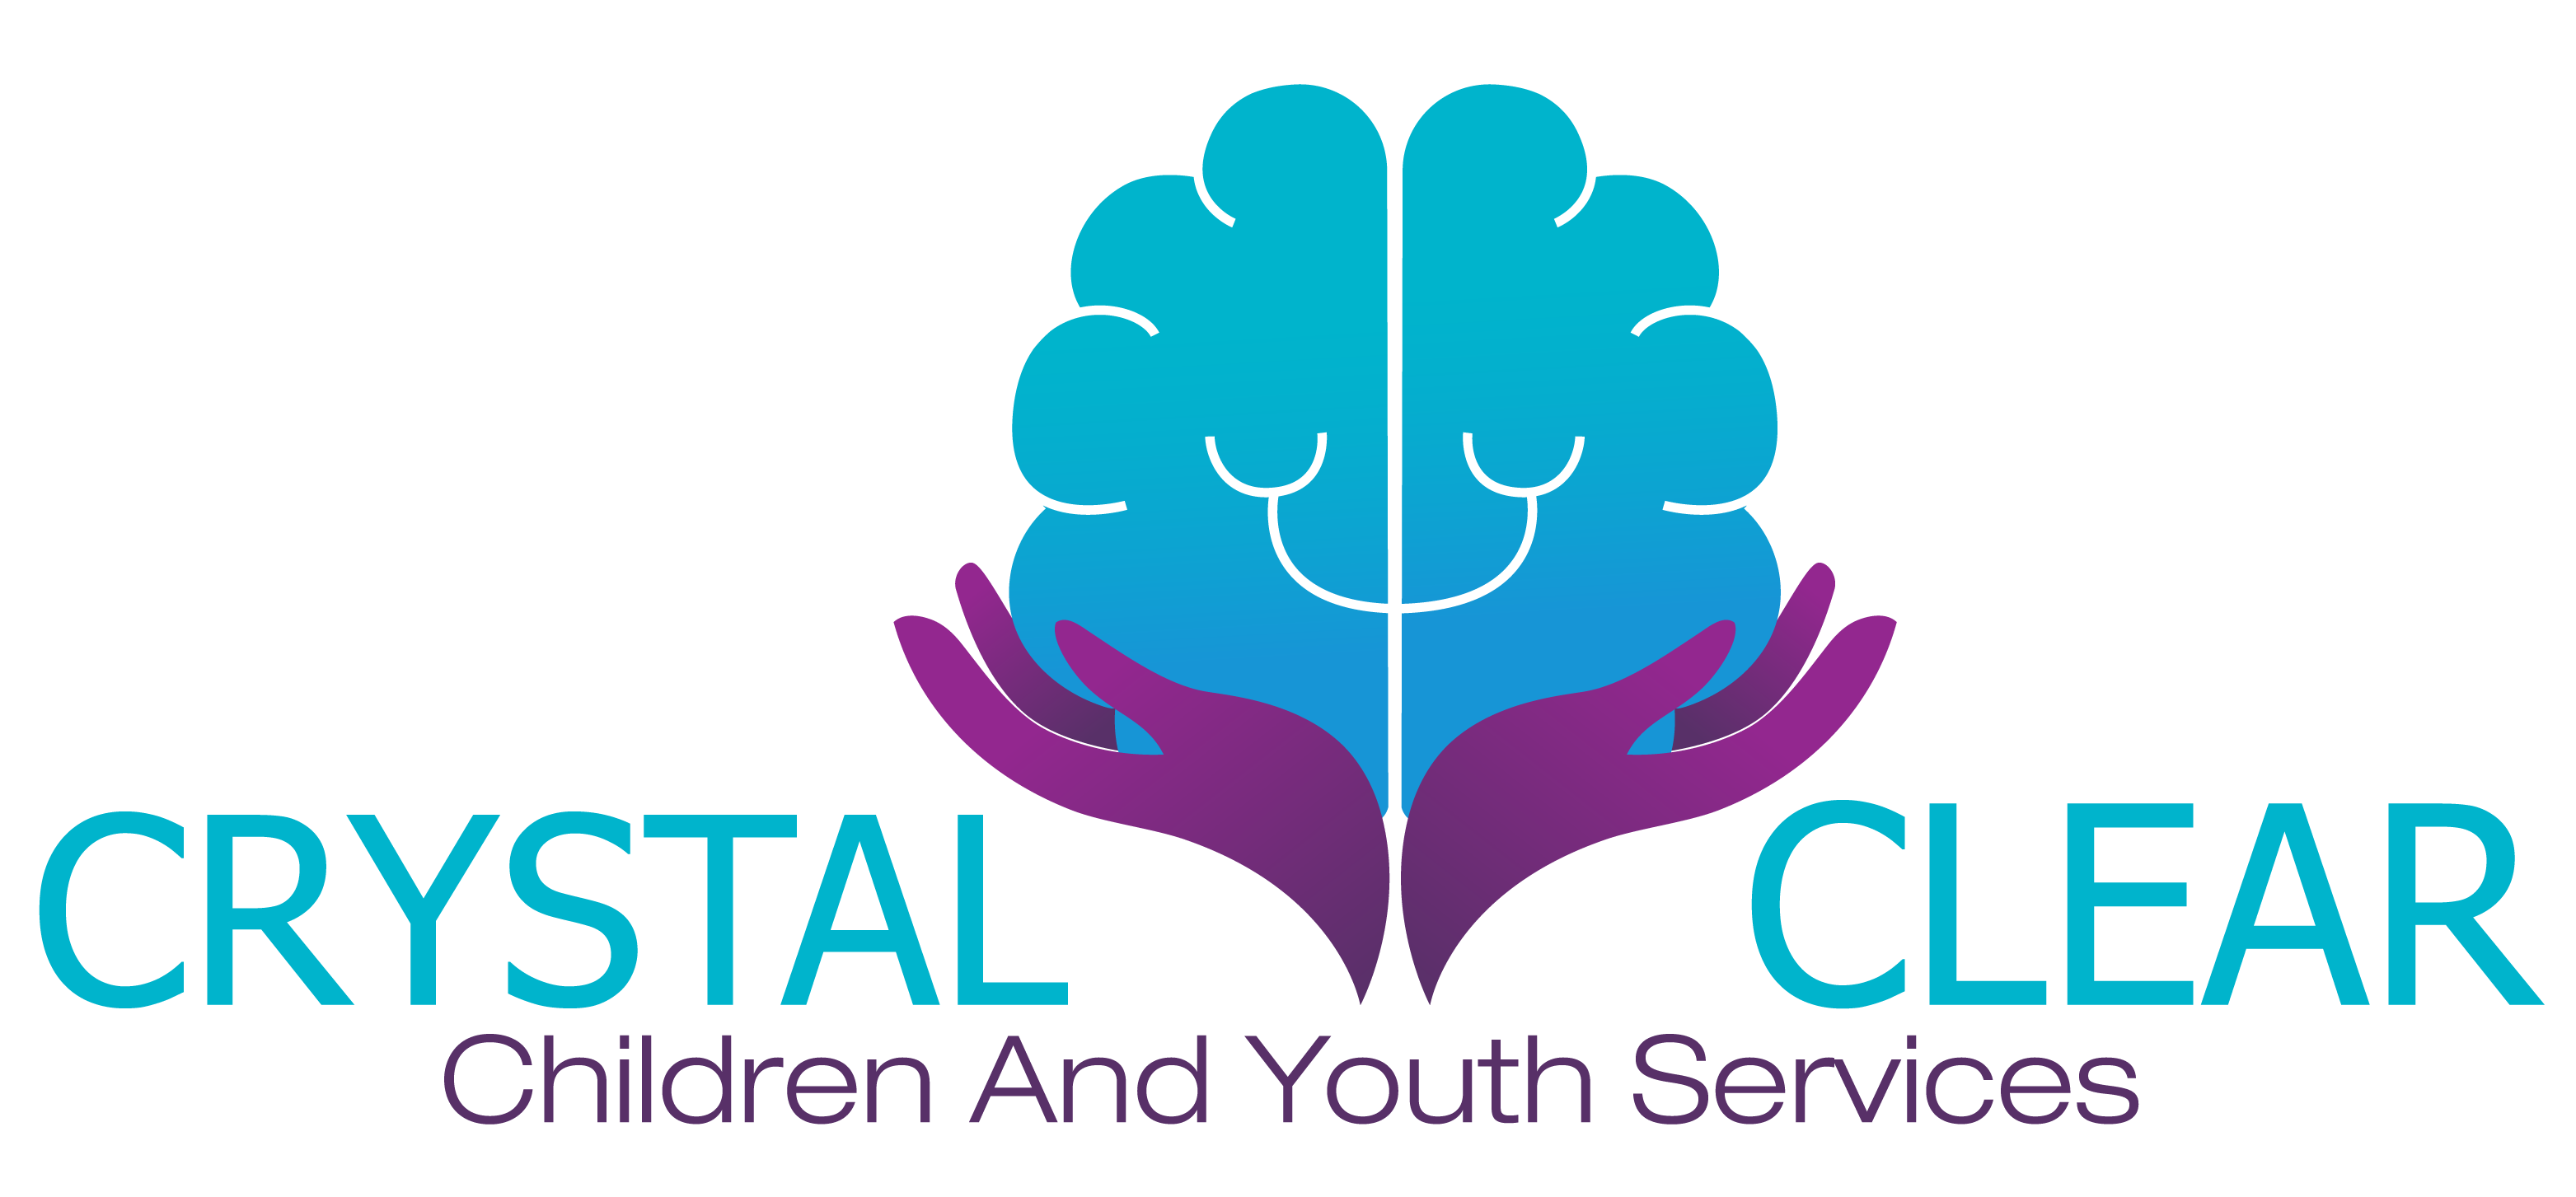 building-crystal-clear-children-and-youth-services